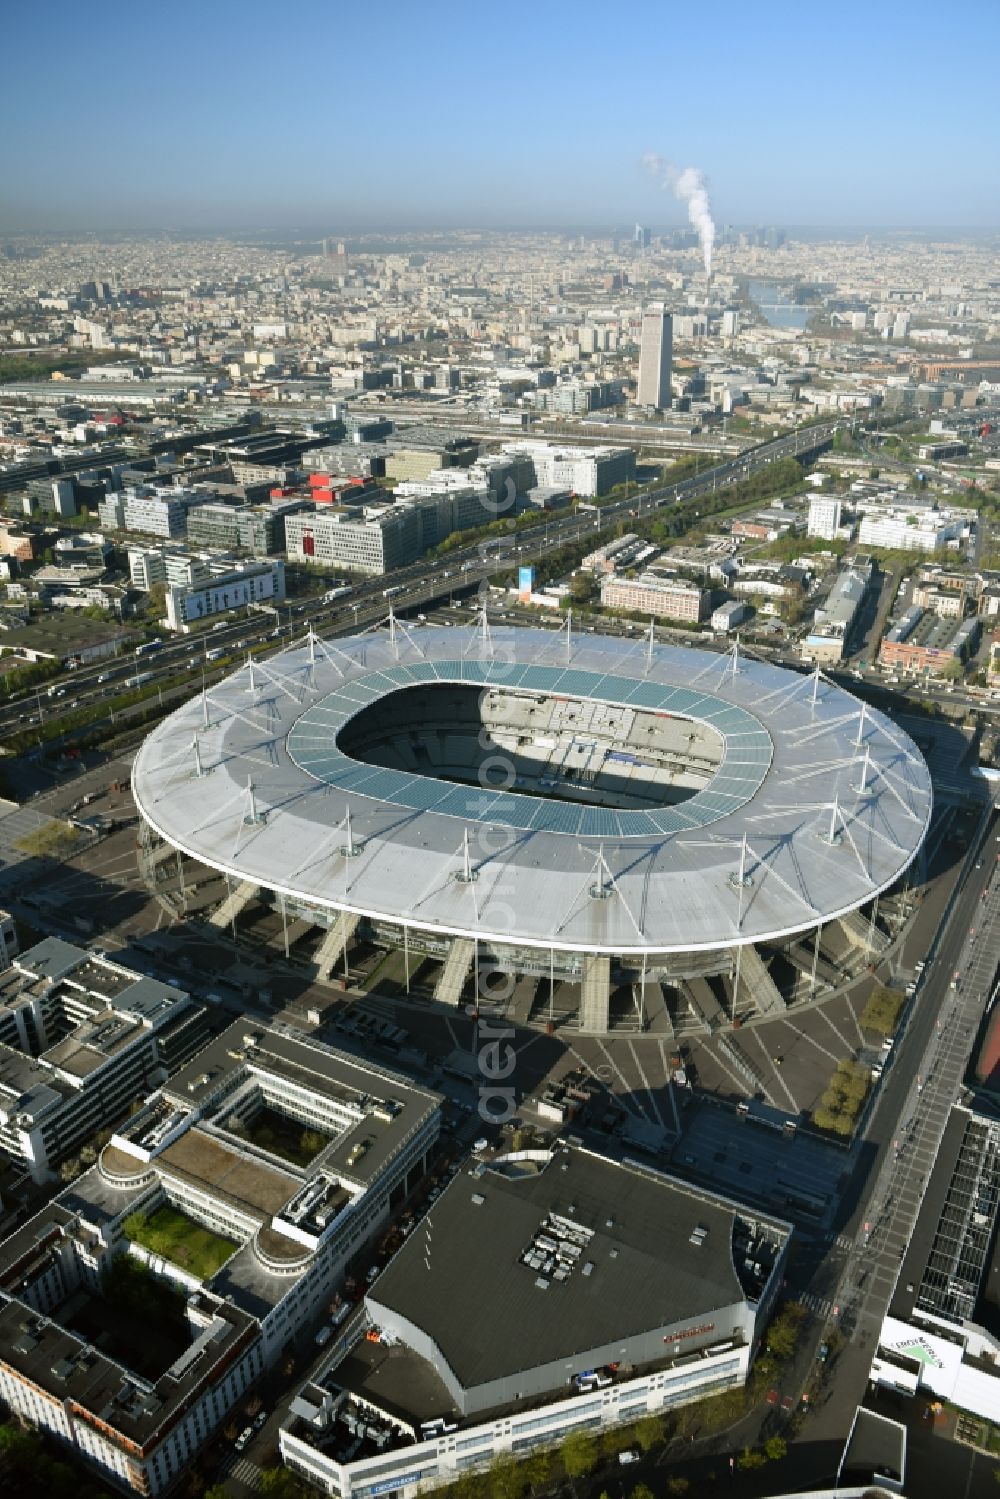 Aerial image Paris Saint-Denis - Sports facility grounds of the arena of the Stade de France before the European Football Championship Euro 2016 in Paris -Saint-Denis in Ile-de-France, France